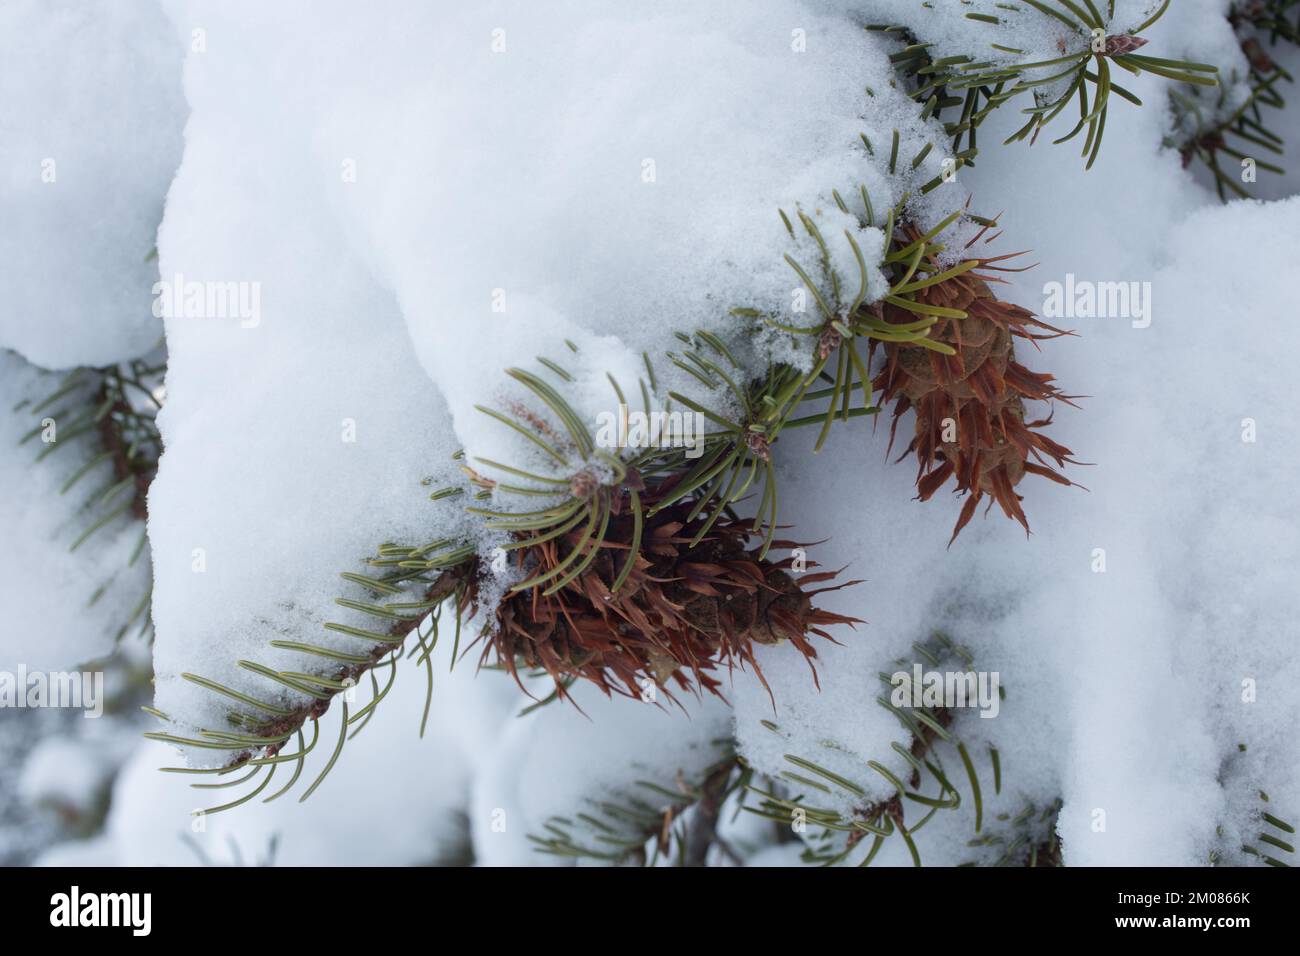 Snow frosted Rocky Mountain Douglas fir tree branch with cones, Pseudotsuga menziesii var. glauca, standing alone in a field, in Troy, Montana.   King Stock Photo